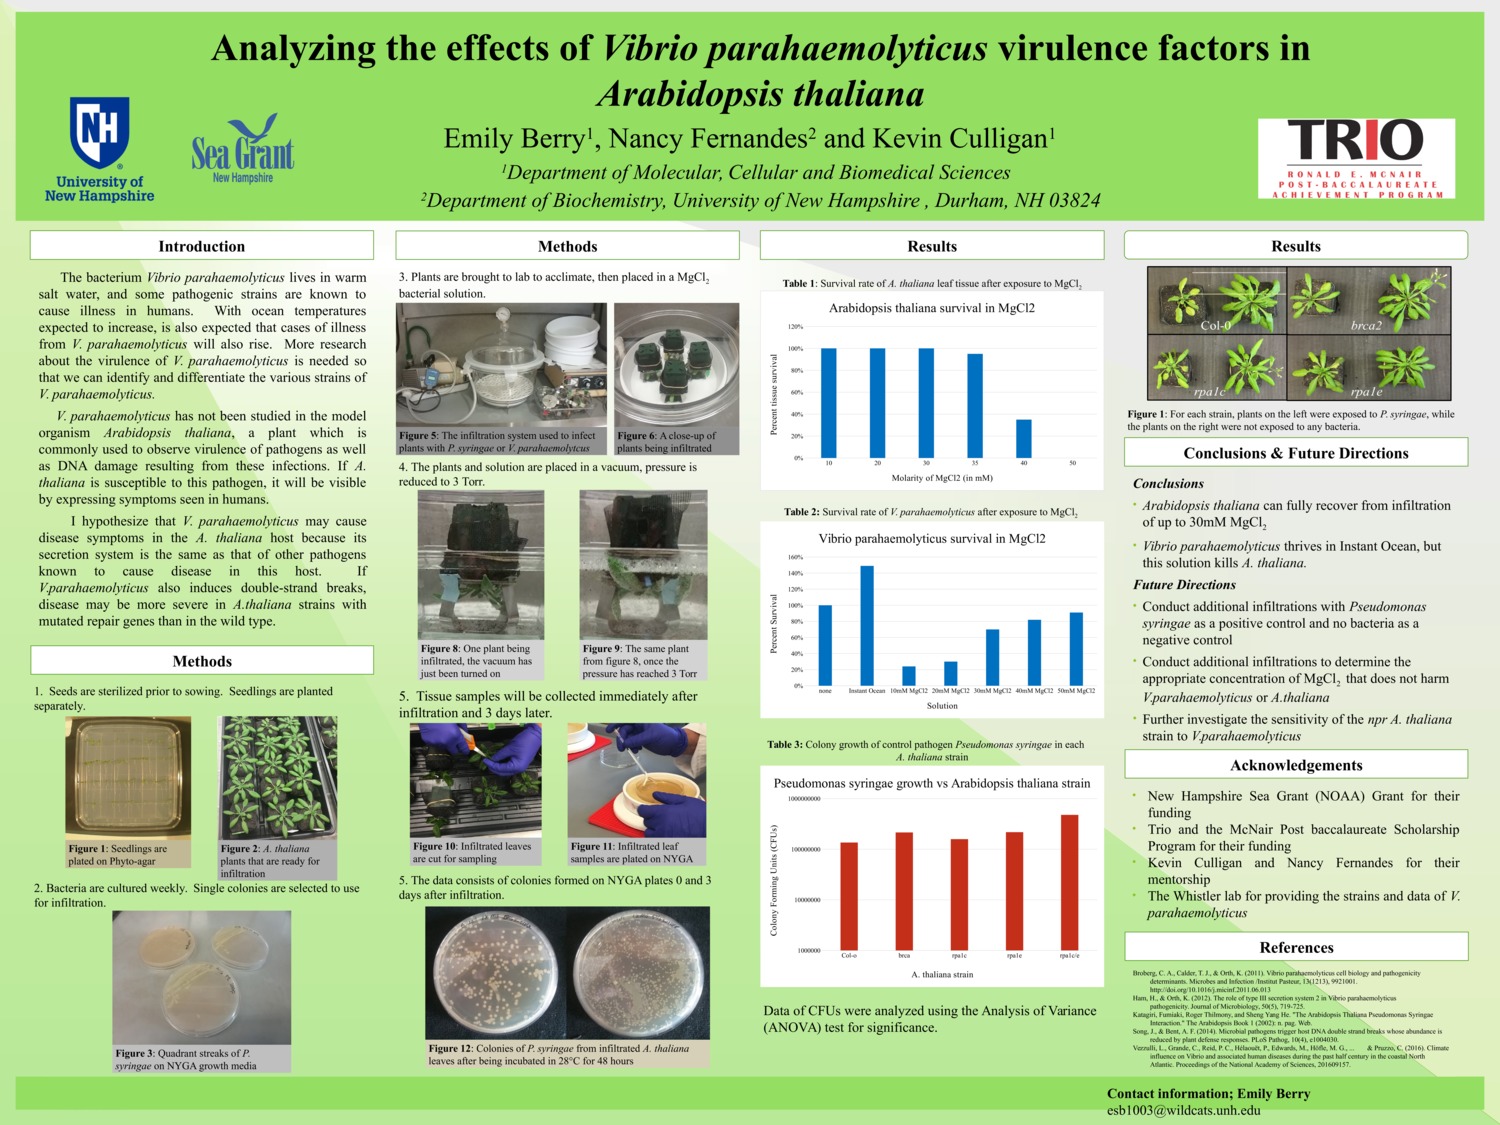 Analyzing The Effects Of Vibrio Parahaemolyticus Virulence Factors In Arabidopsis Thaliana by esb1003